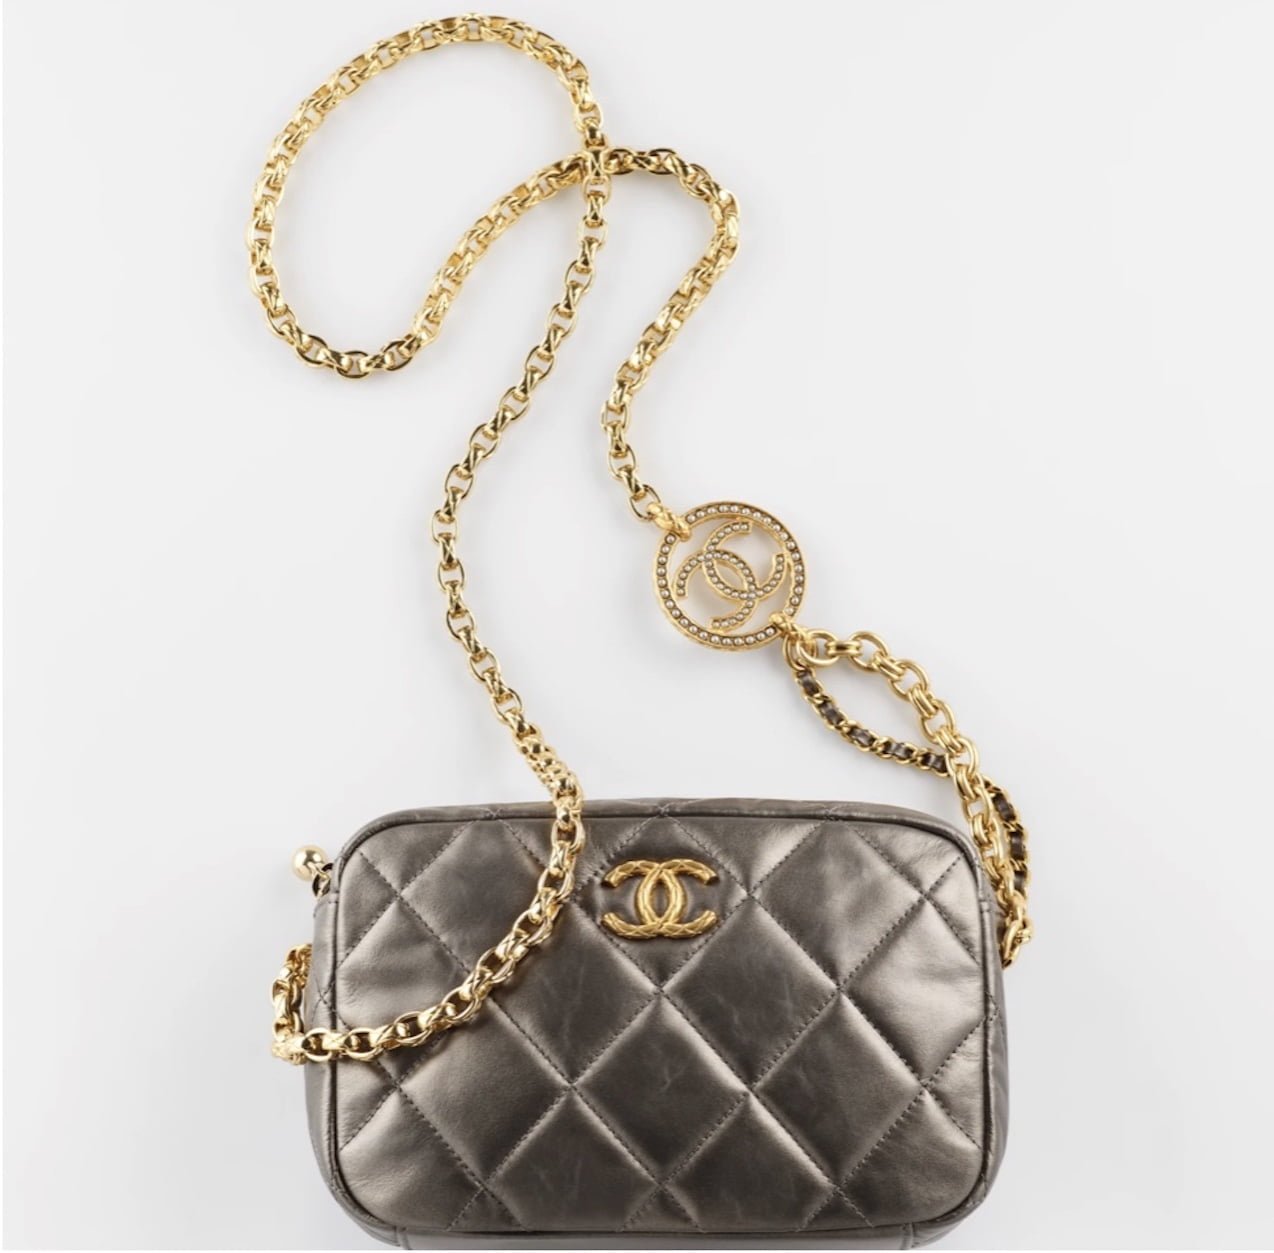 Chanel Is Next Year's Must Have Bag Brand! Hot Selling Small Box Bag Has A Major  Revival & The Heart-shaped Arrival Is Set To Become A Sell Out!